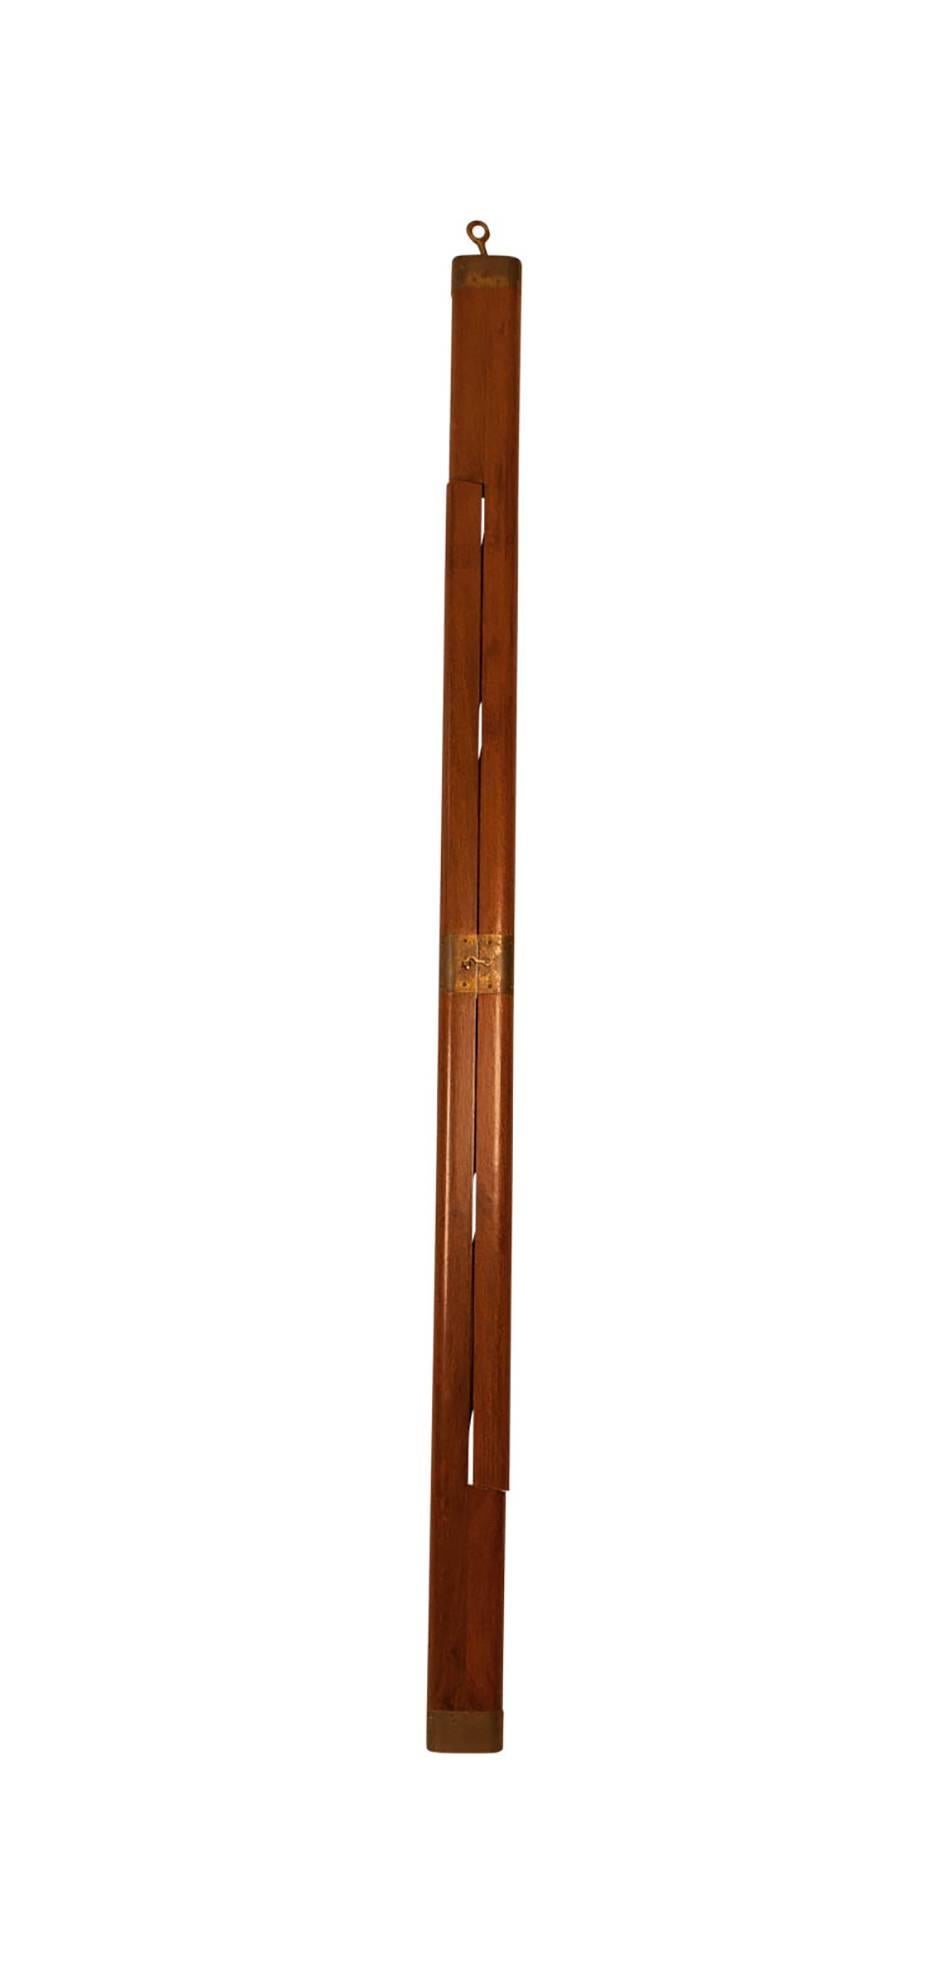 A handsome Anglo-Indian mahogany brass-mounted folding elephant ladder, circa 1920. A rare interesting and useful piece made during the late colonial period.